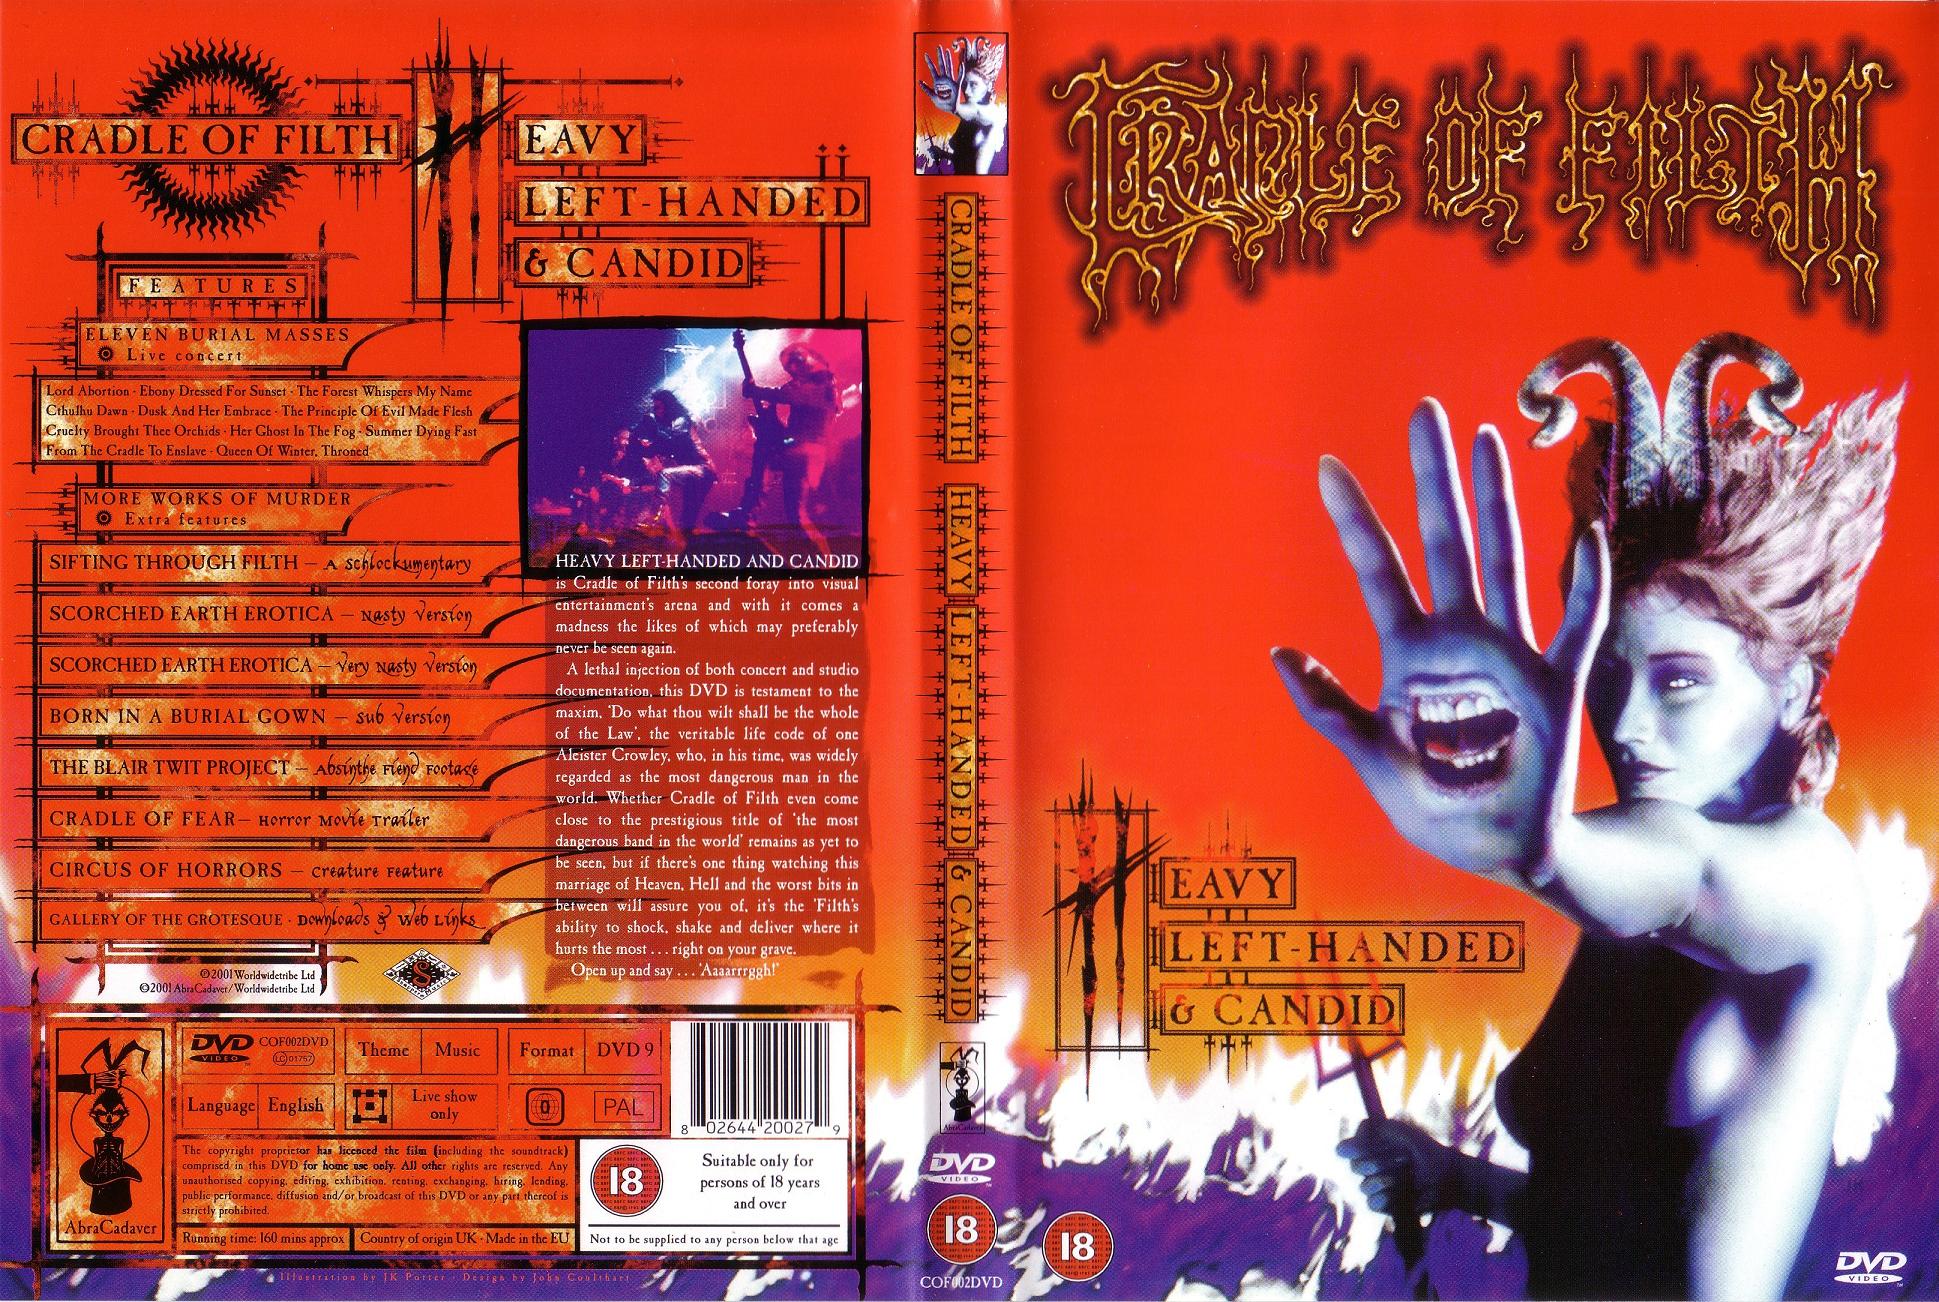 Jaquette DVD Cradle of Filth Heavy Left Handed and Candid